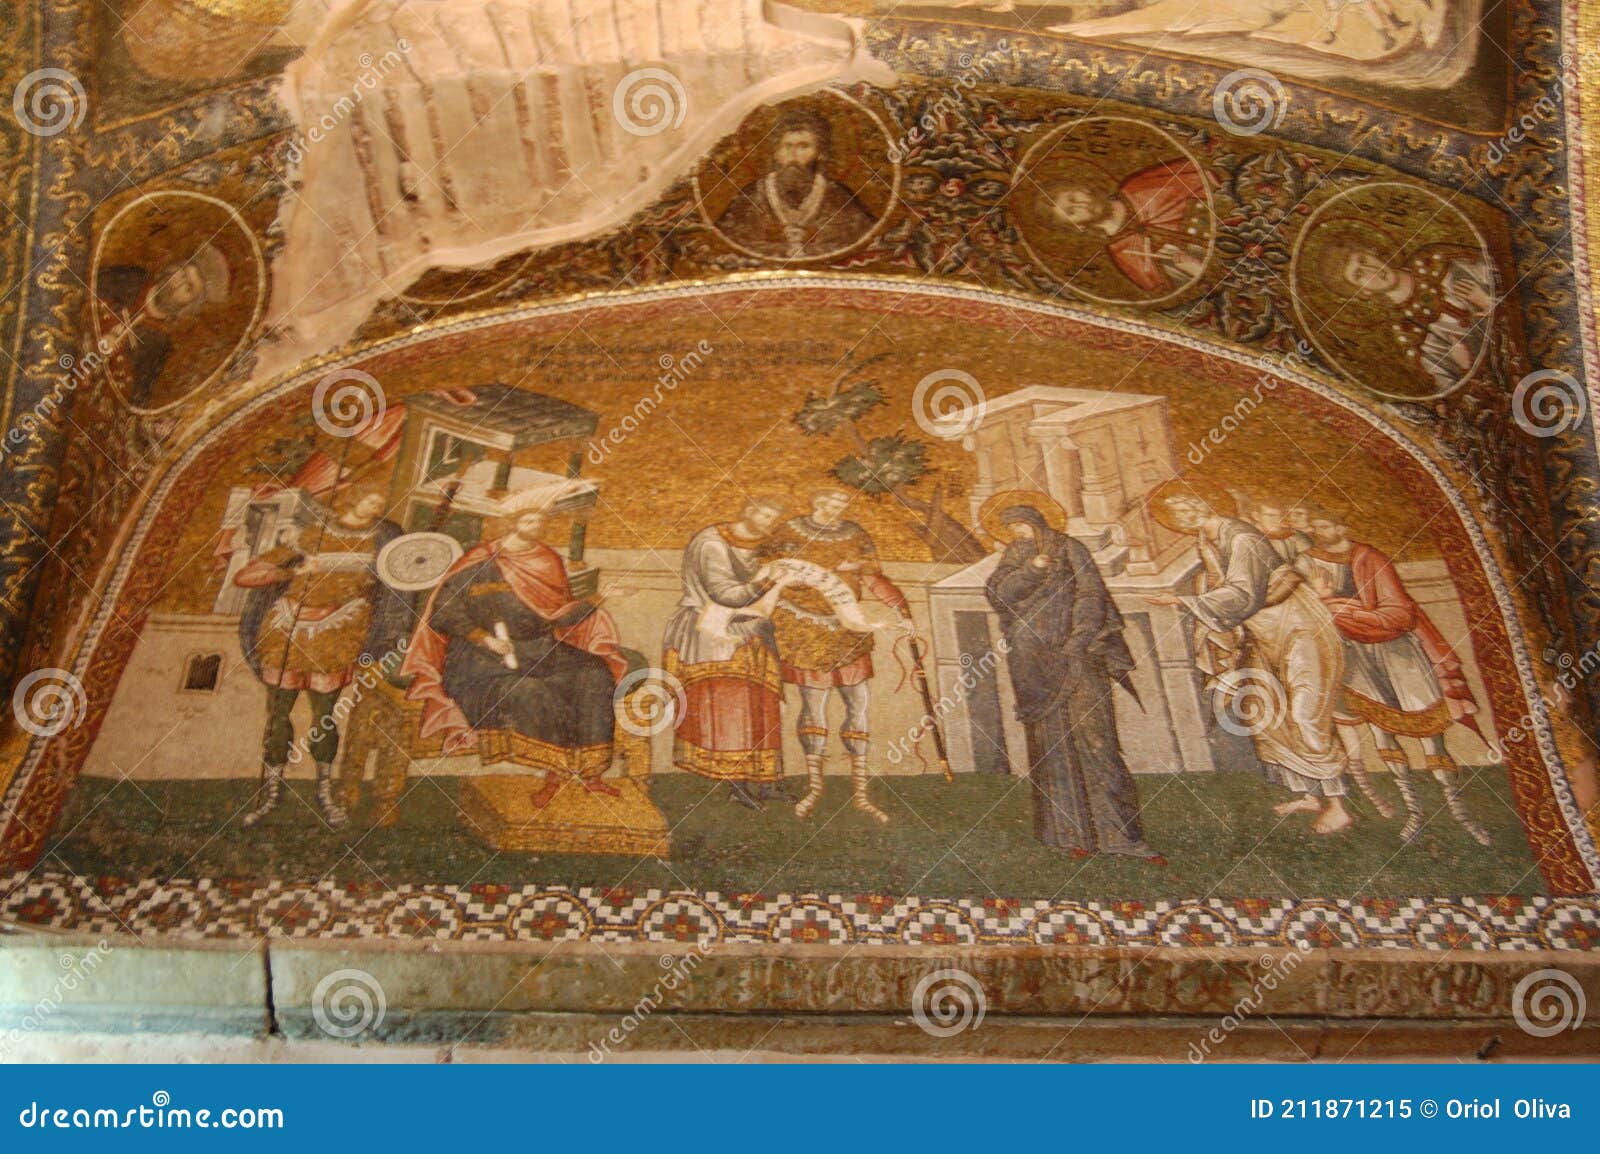 orthodox christian church of saint savior in chora (istanbul, turkey). old paintings on the ceiling